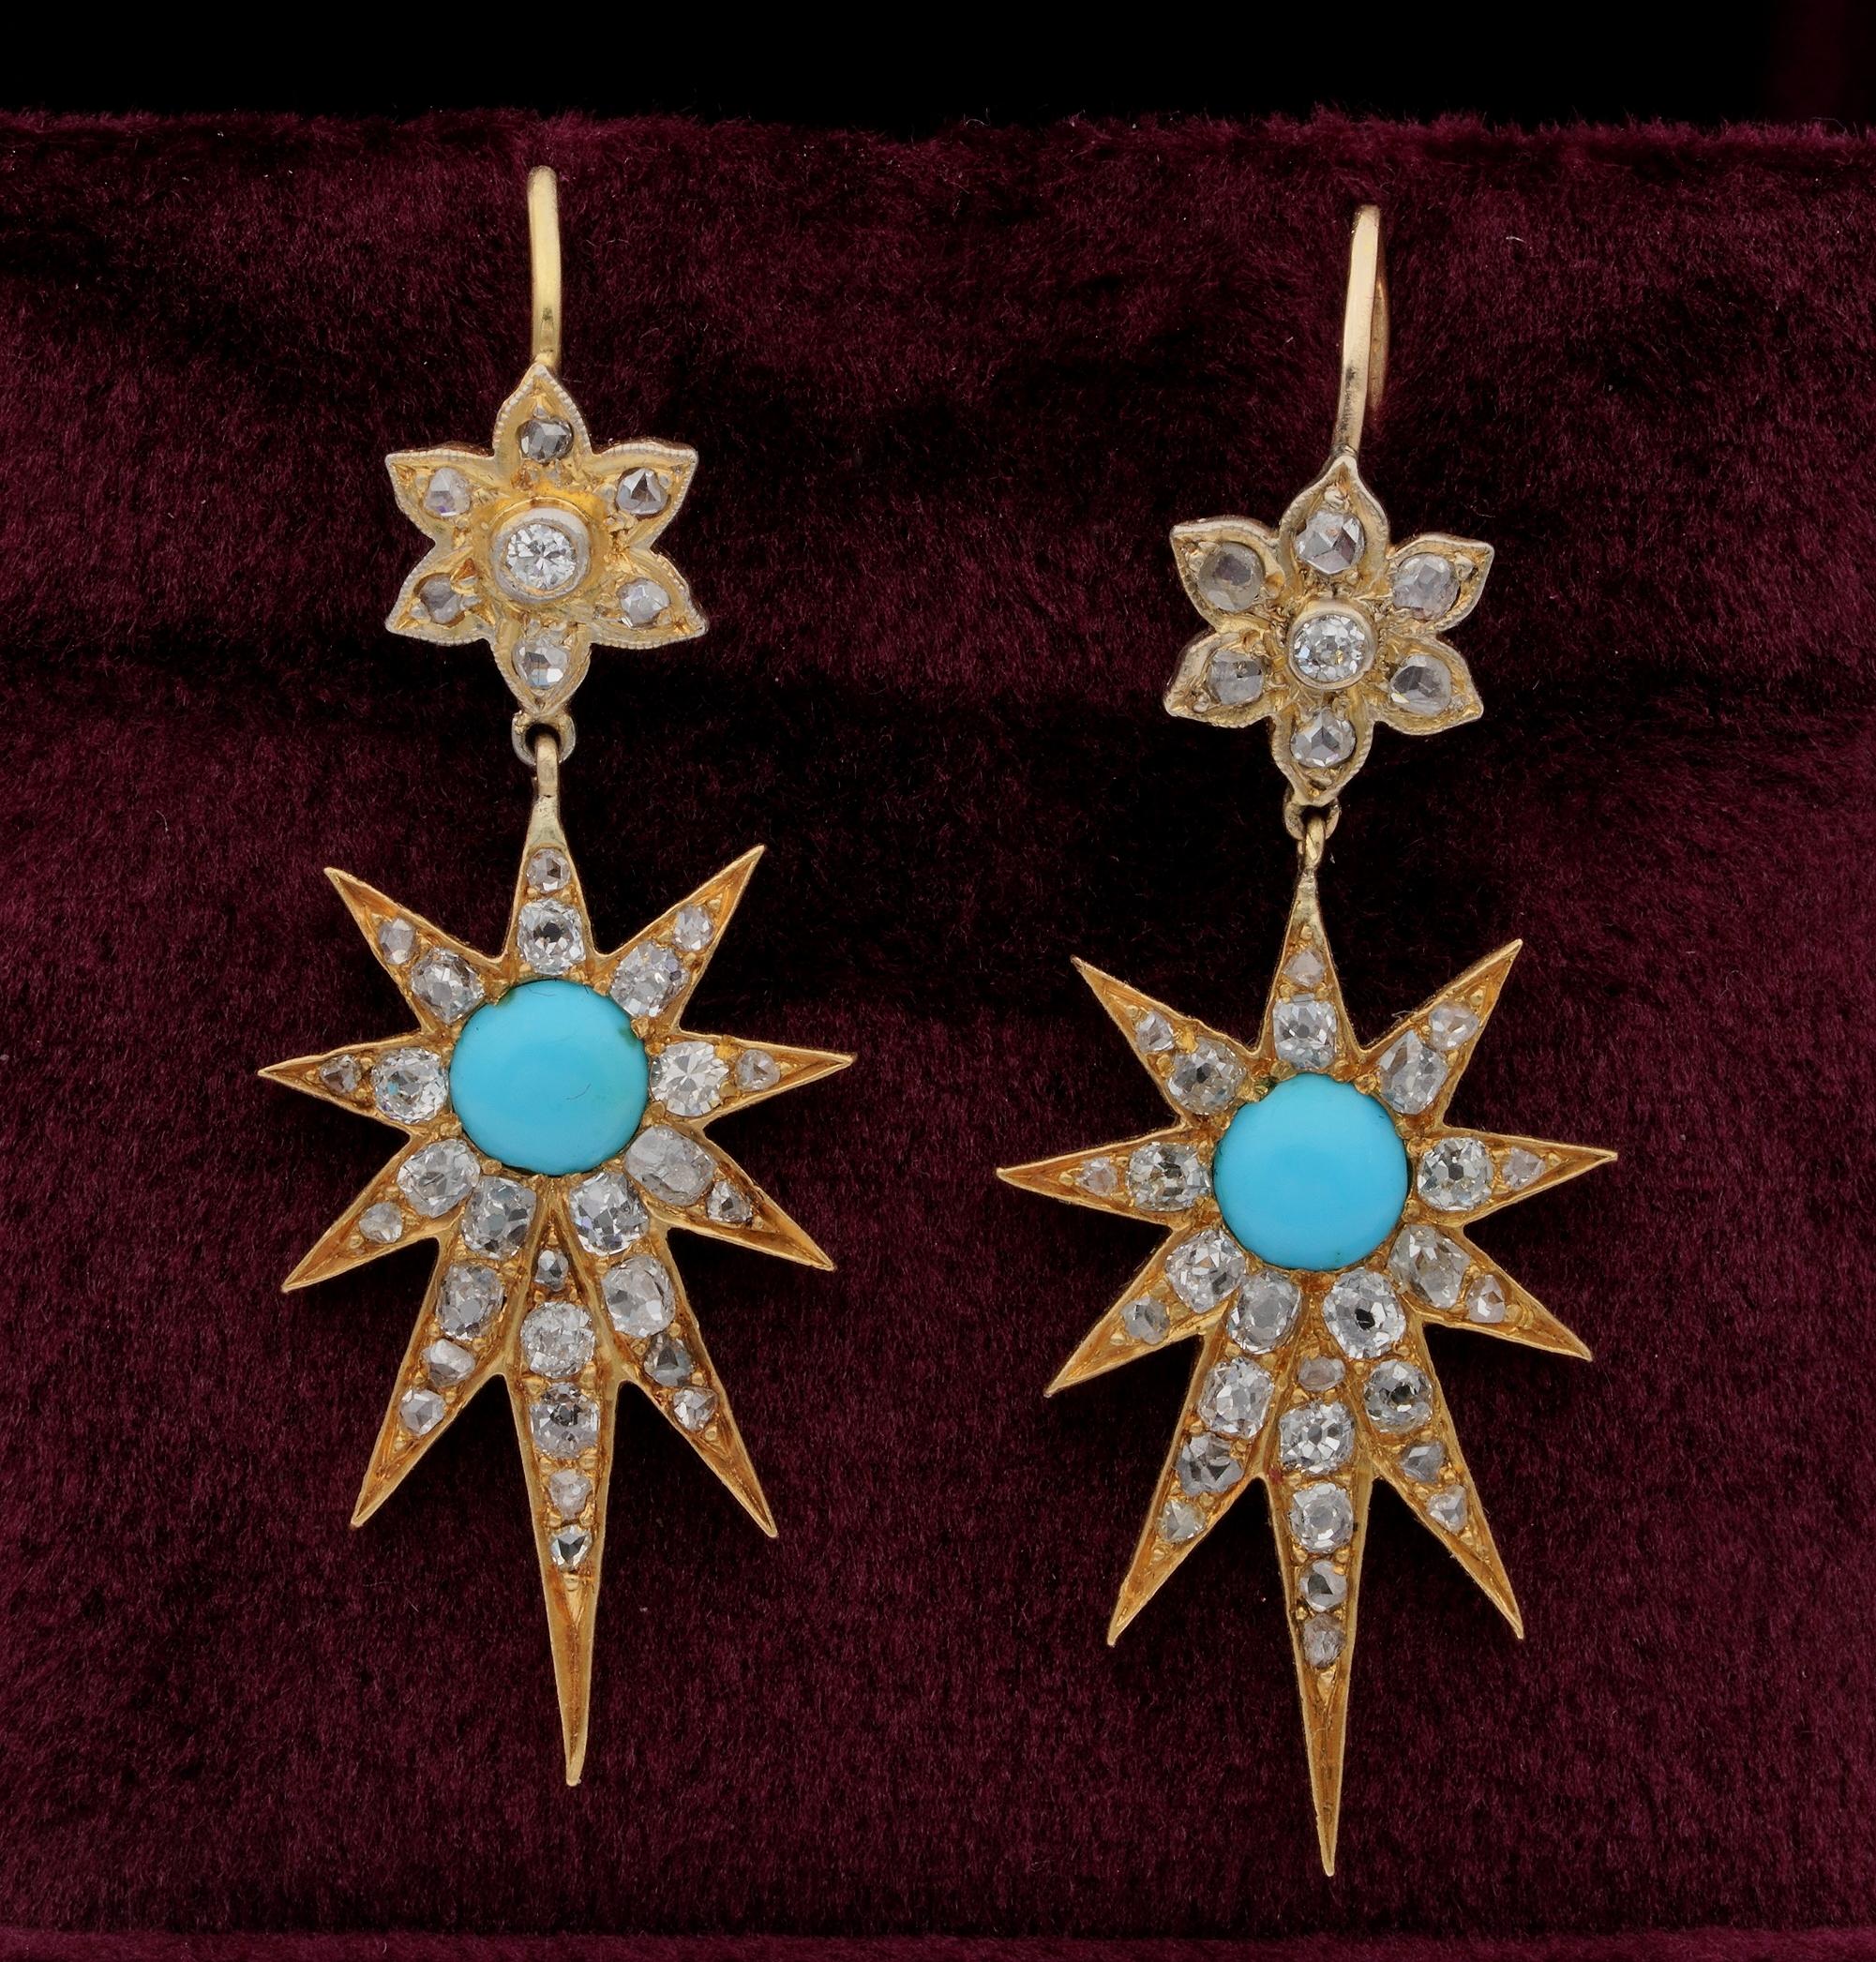 Dropping from Sky

Beautiful antique Victorian period classy Star shaped celestial motif drop earrings
Lovely dainty design, hand crafted during 1880 of solid 18 Kt gold – top fleurette design punctuated by tiny rose cut Diamonds, with a lovely Star